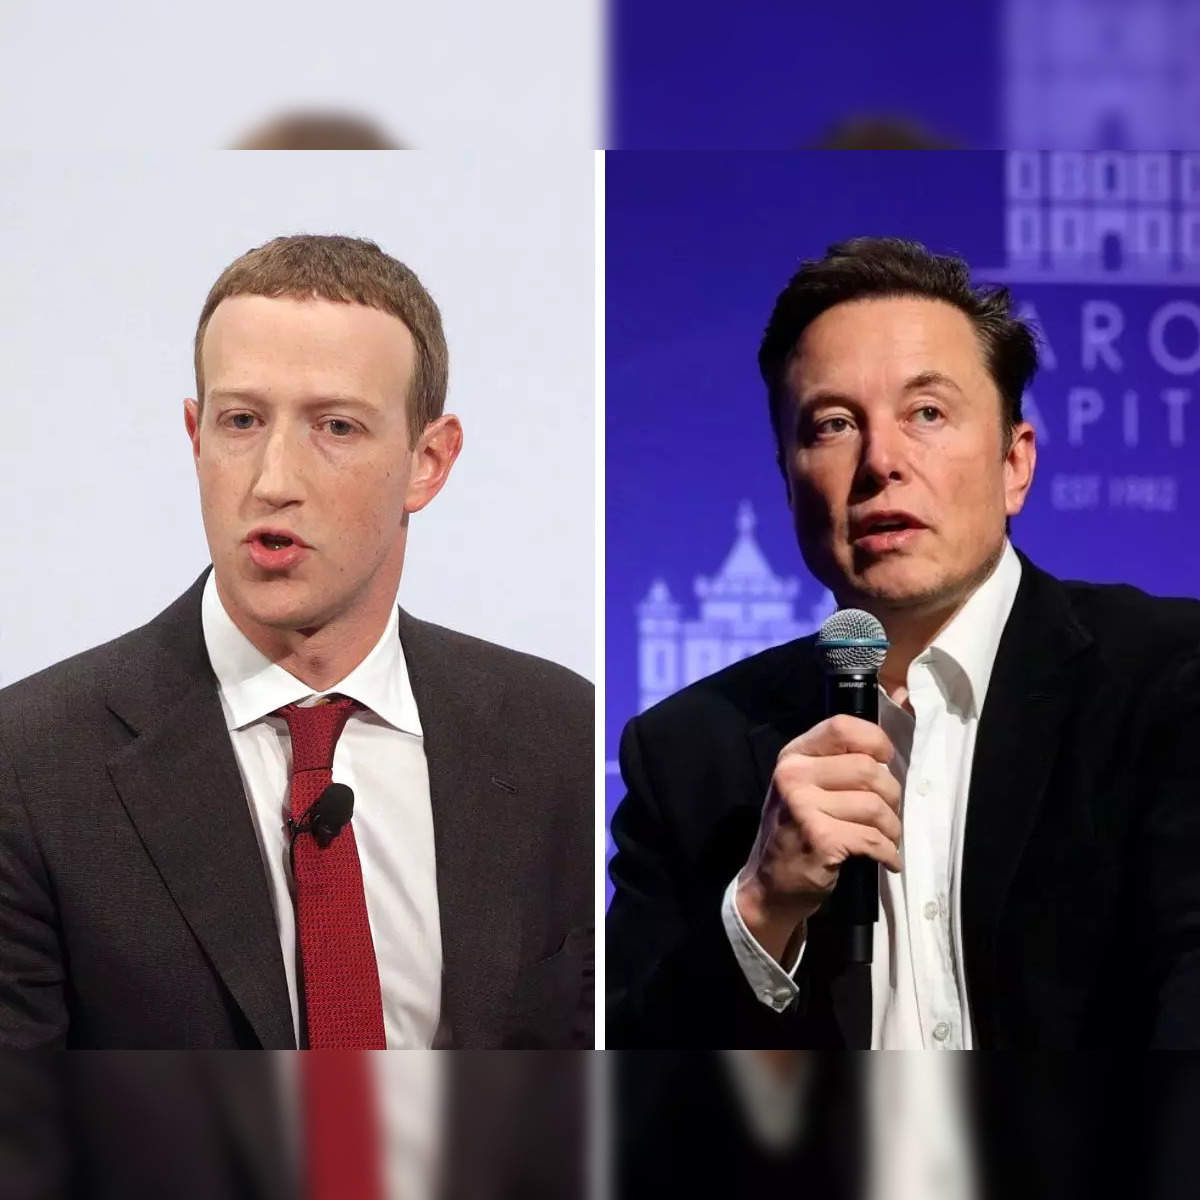 Elon Musk's sparring partner shares training photos ahead of cage match  with Zuckerberg: 'Extremely impressed